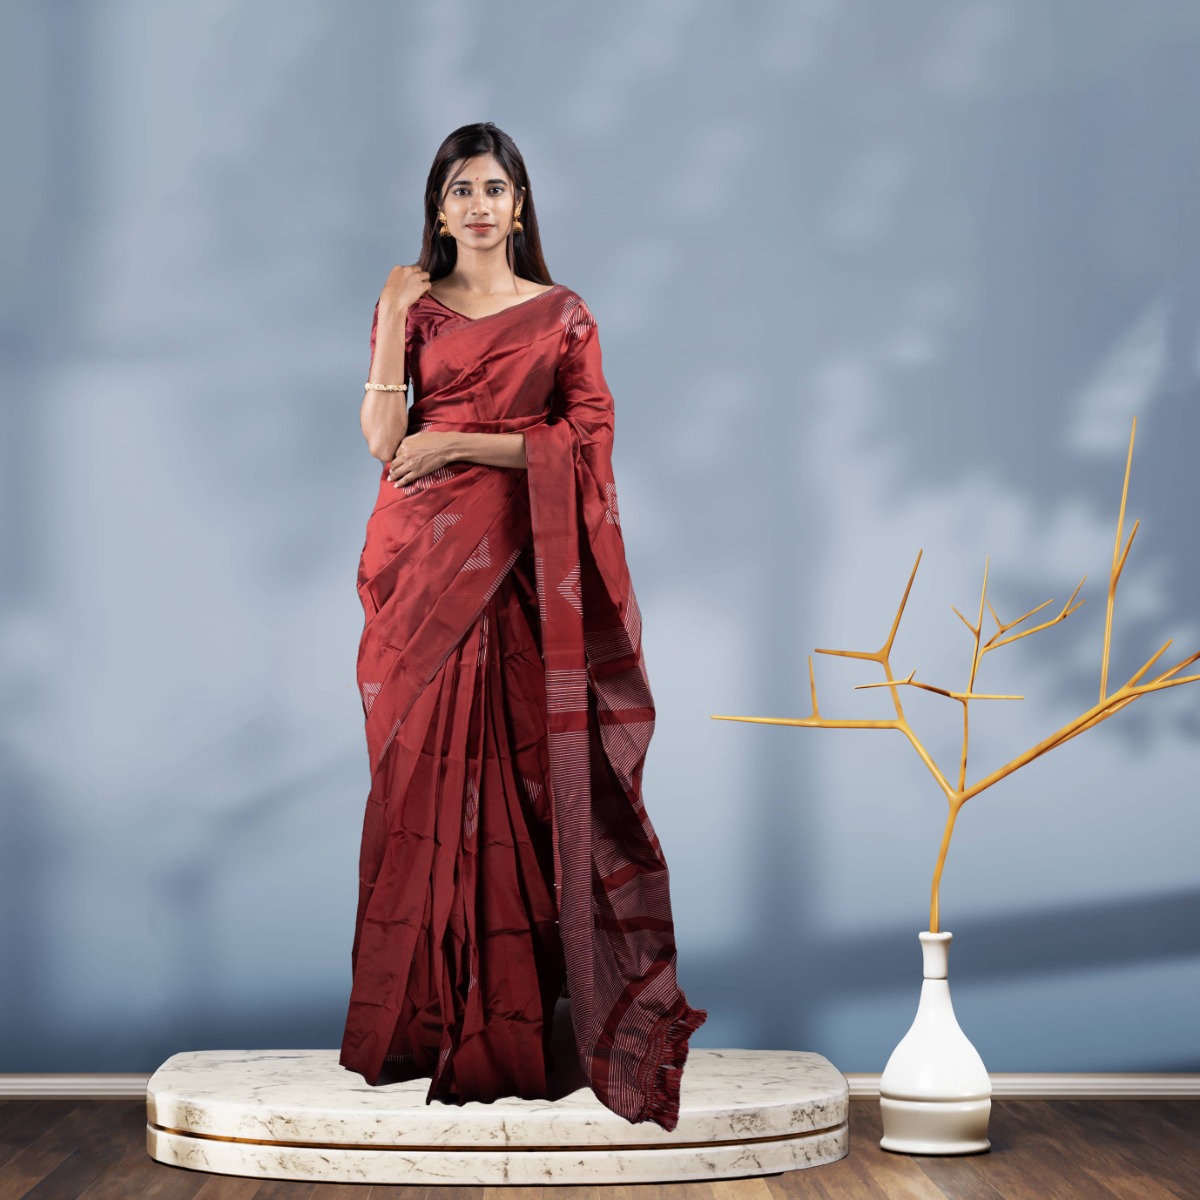 Elegant Vichitra Silk Saree with Stunning Embroidery - Classic Indian Ethnic Wear